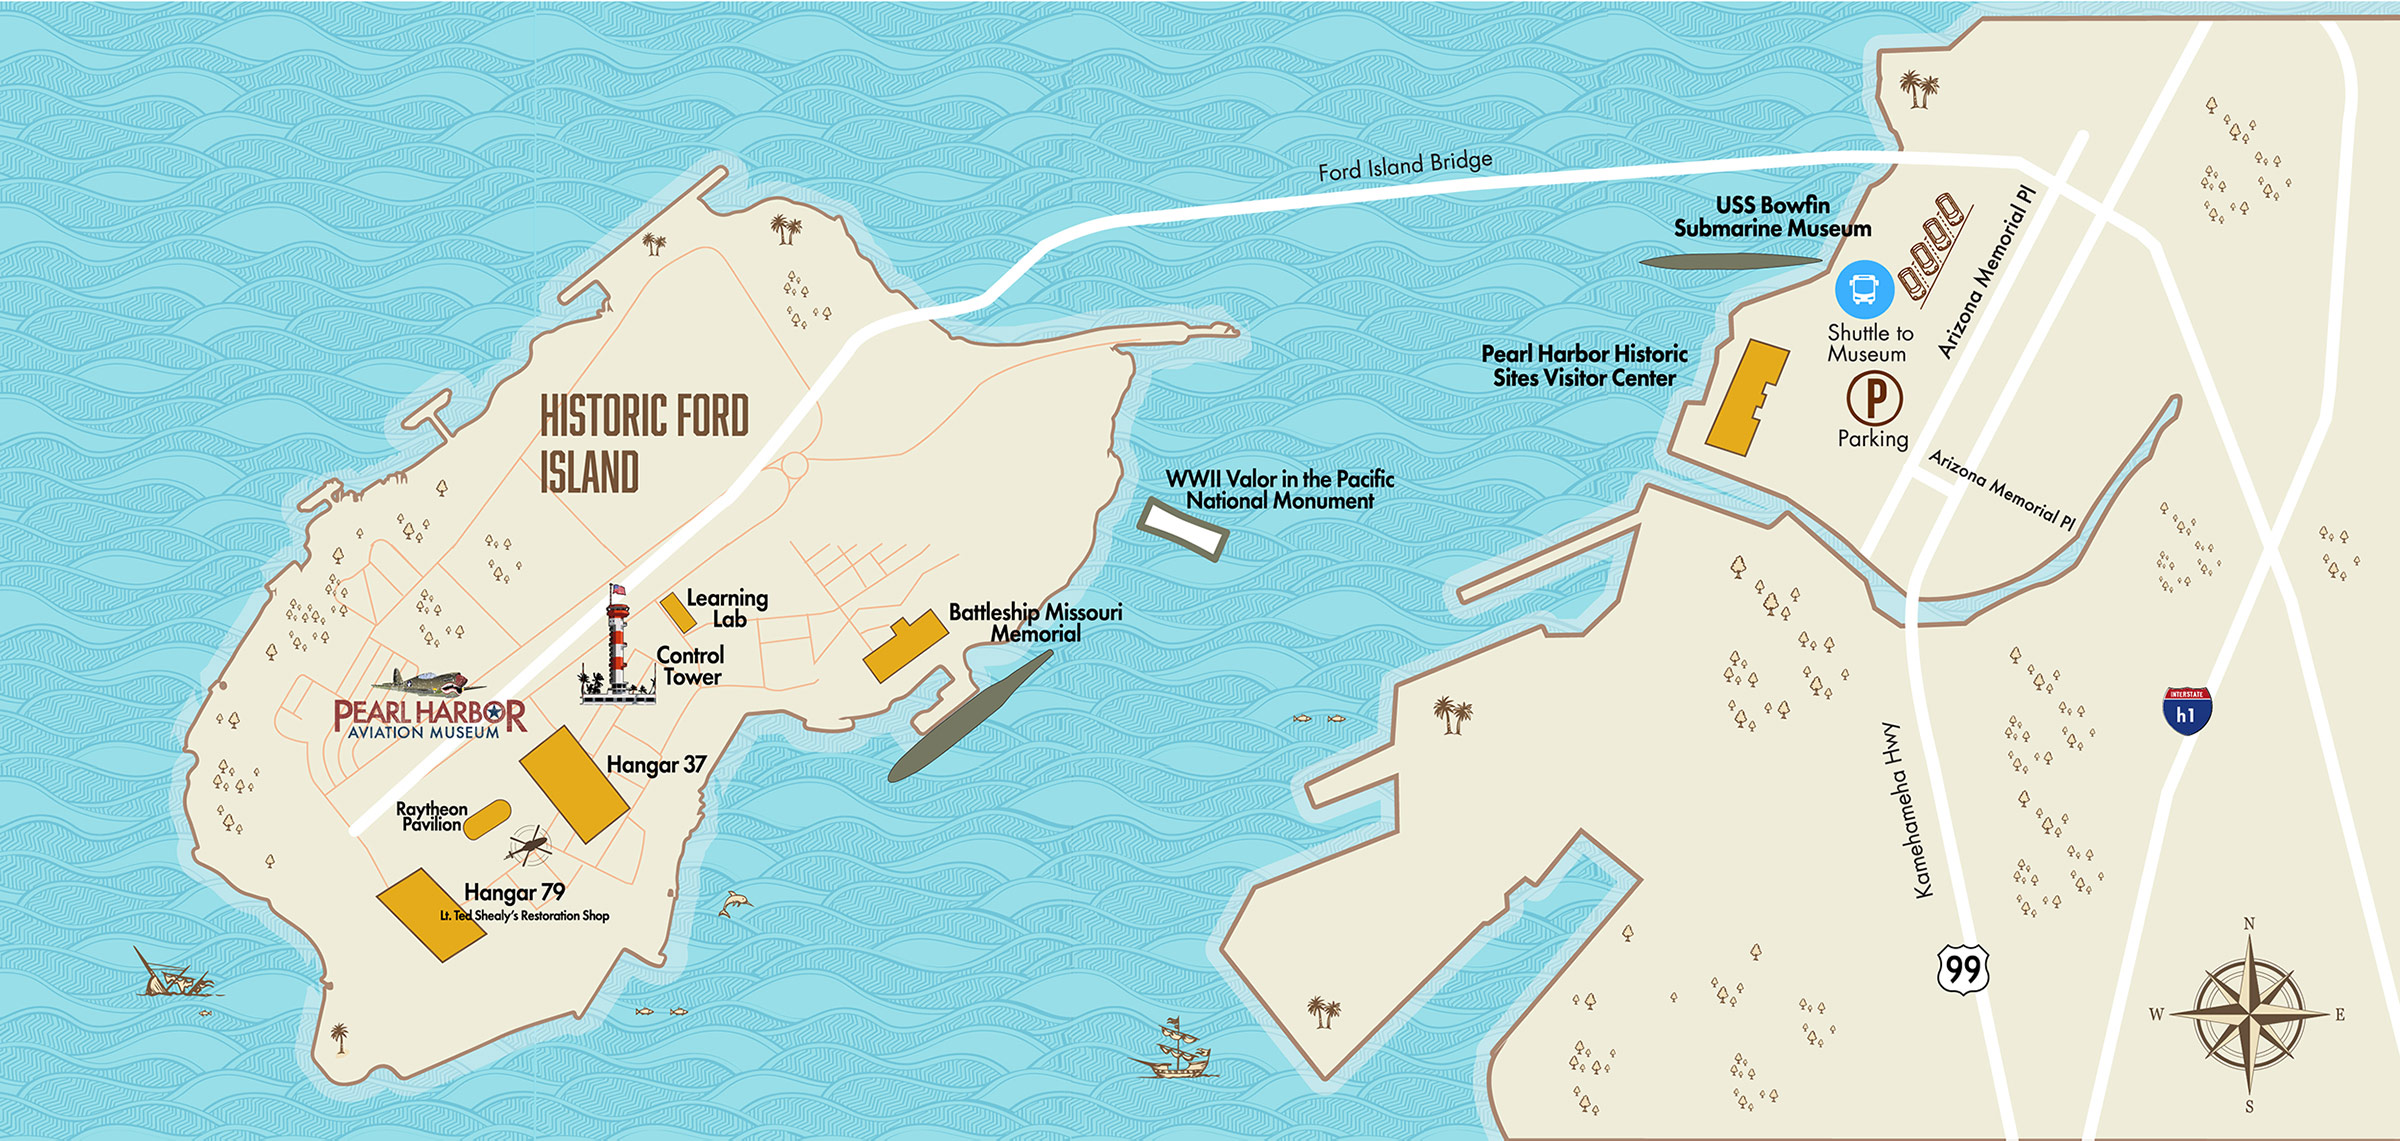 Pearl Harbor Aviation Museum and Ford Island Map